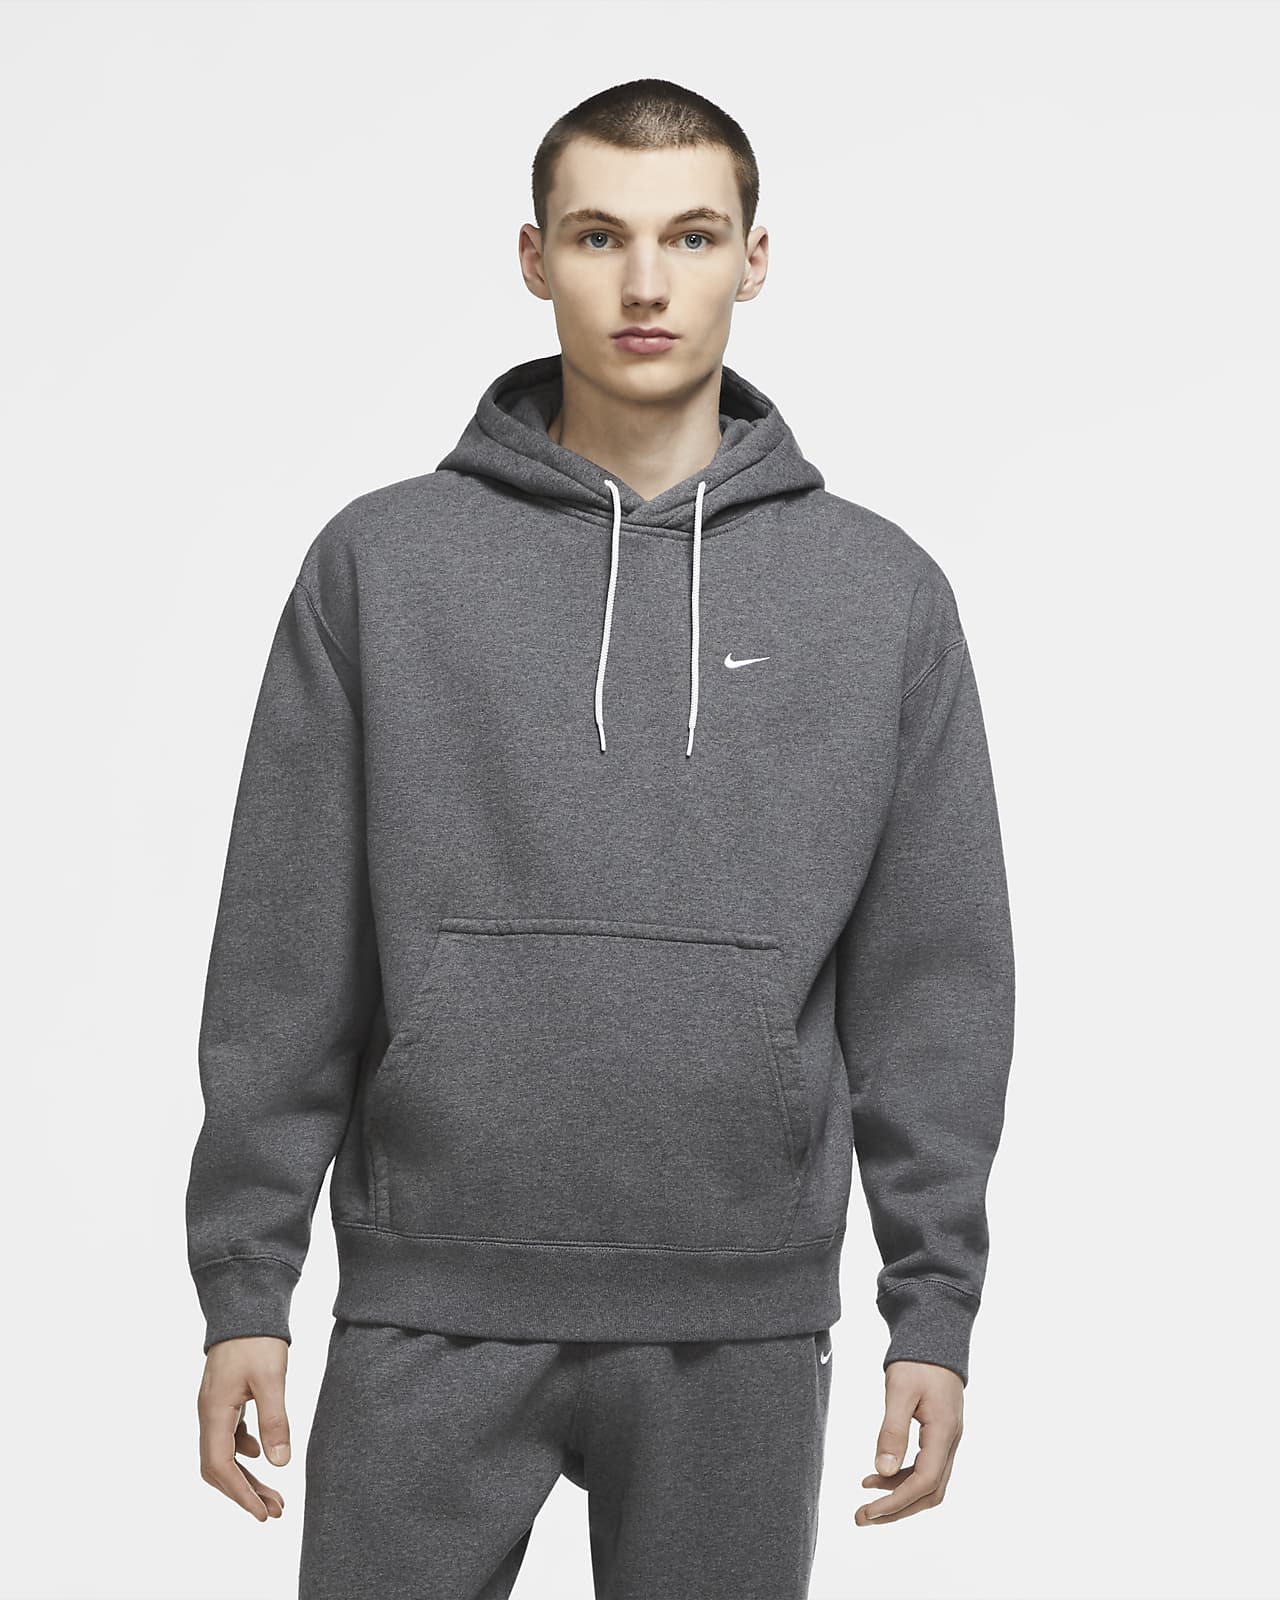 nikelab collection pullover hoodie